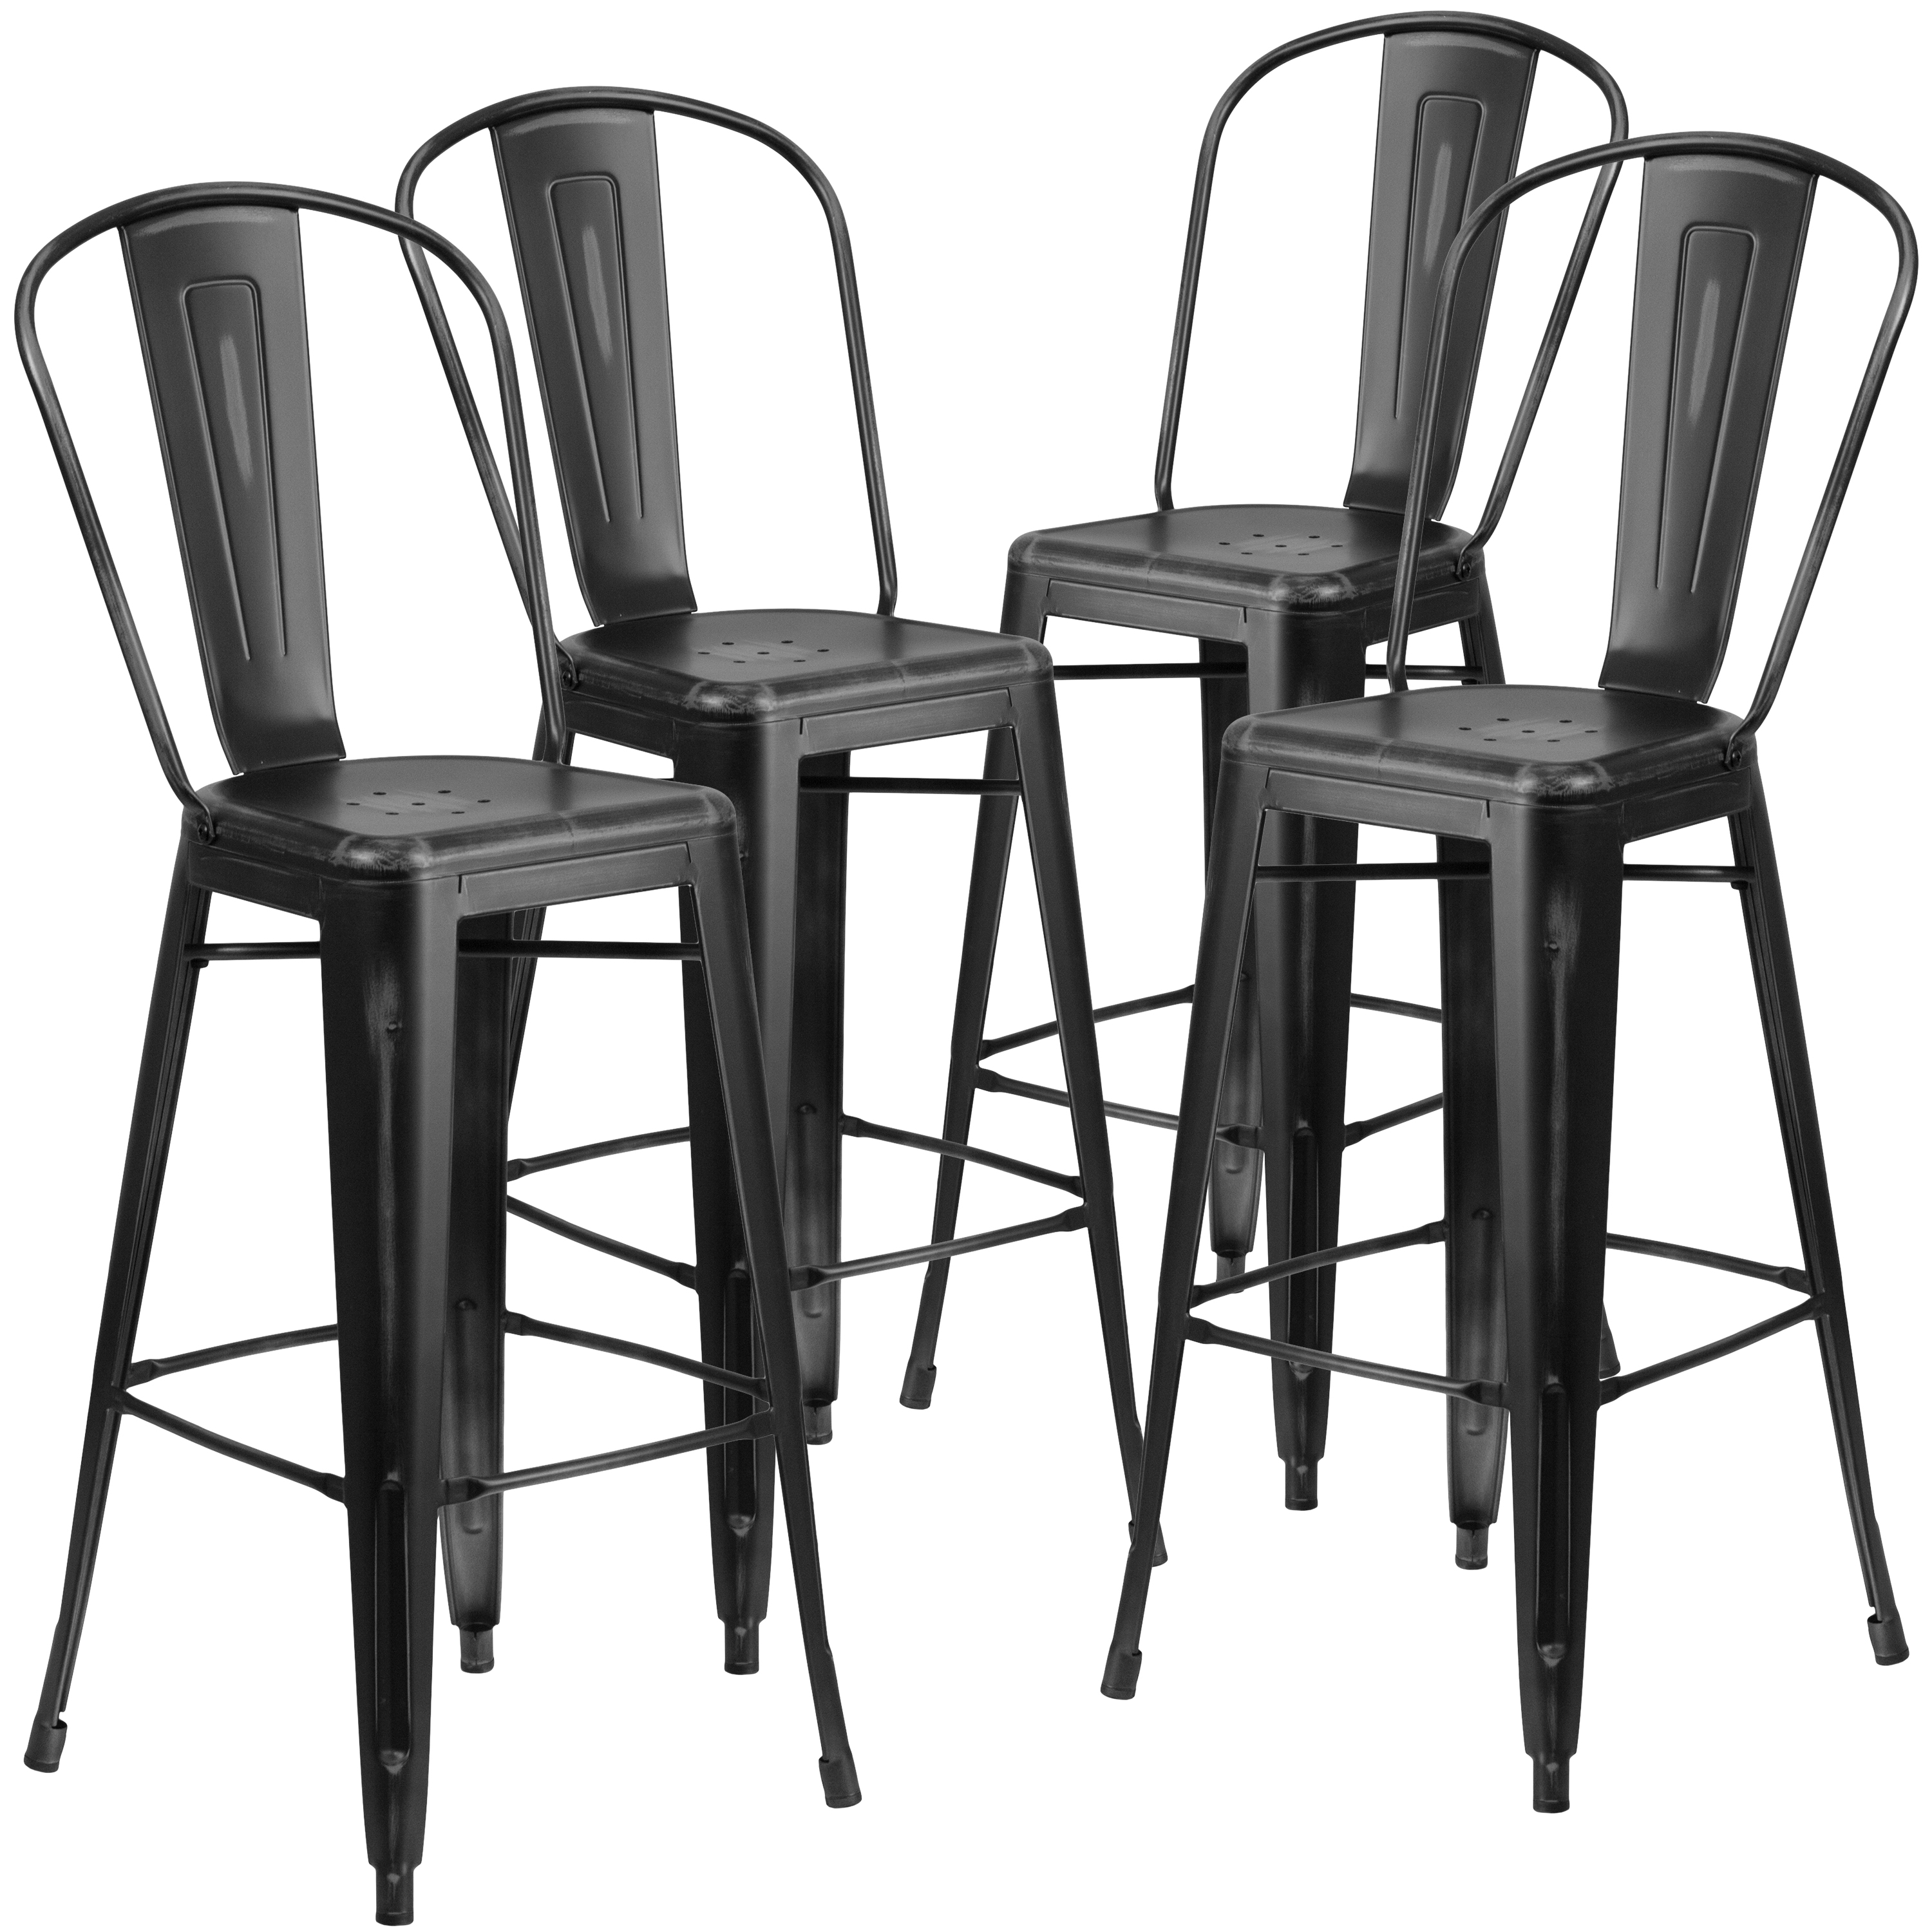 Flash Furniture Blake Commercial Grade 4 Pack 30" High Distressed Black Metal Indoor-Outdoor Barstool with Back - image 1 of 13